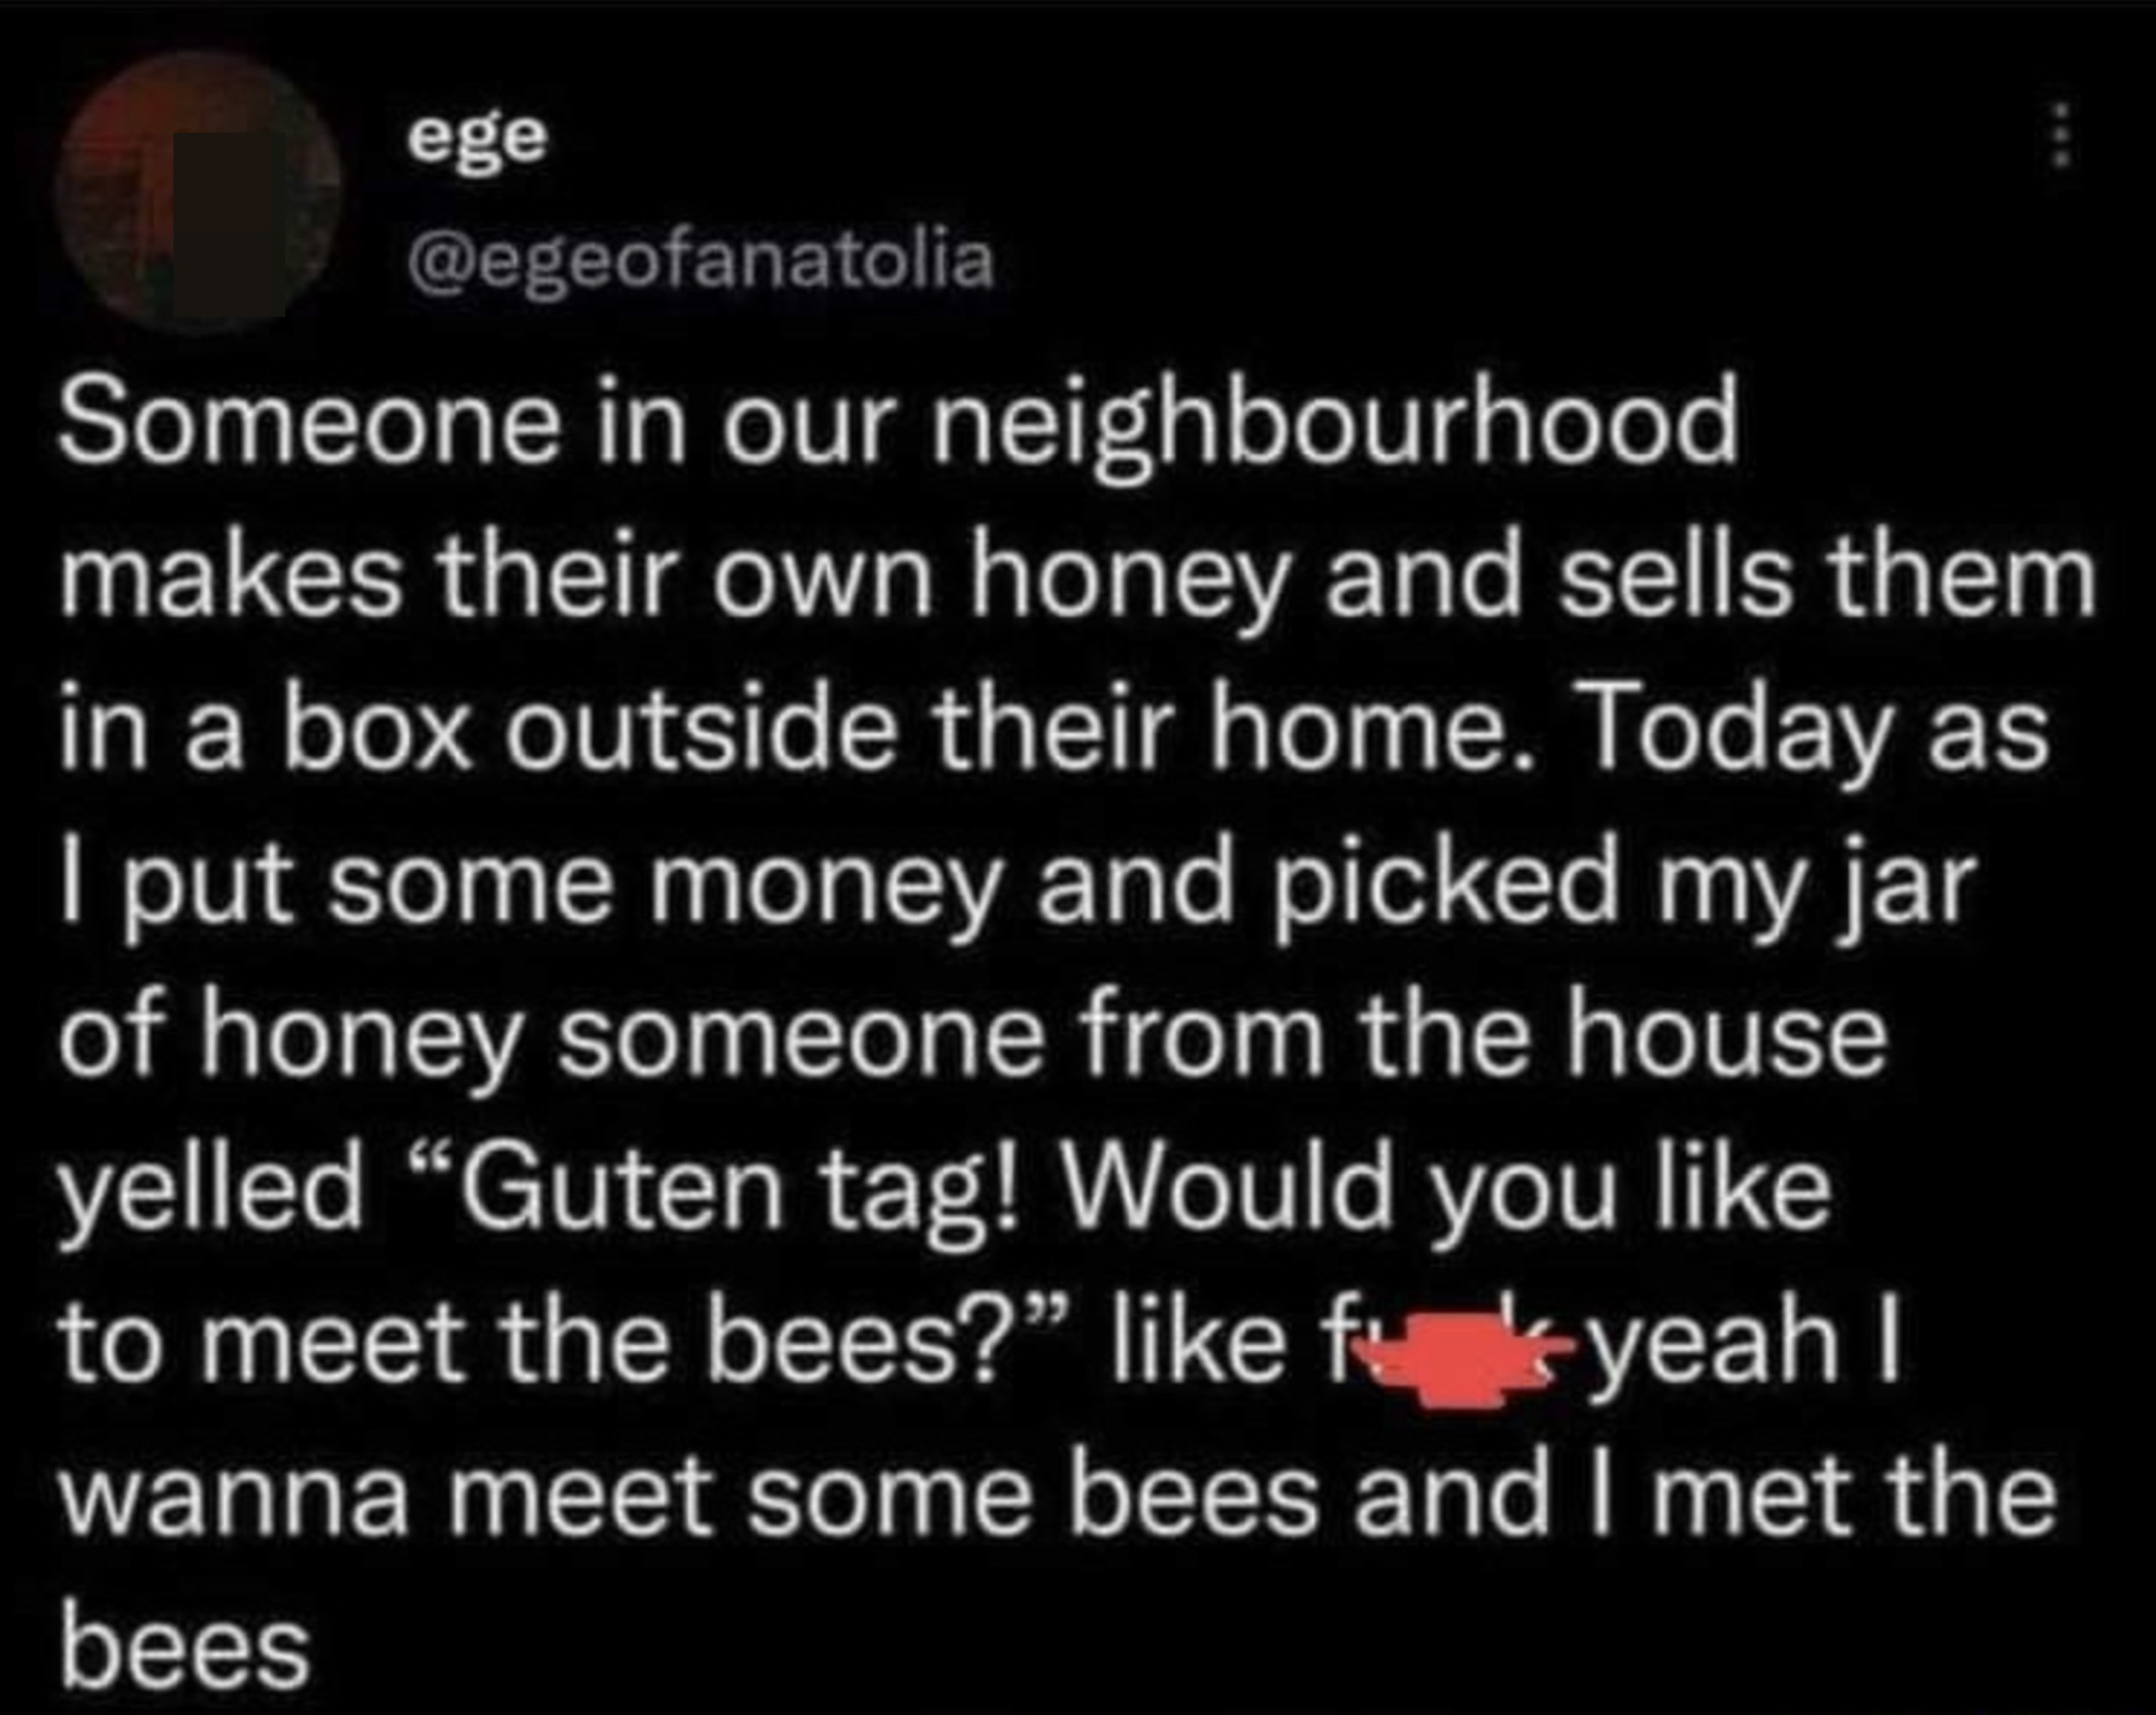 Person bought a jar of honey from neighbor and neighbor asked them if they wanted to meet the bees, and the person was like, &quot;Fuck yeah, I wanna meet some bees&quot;